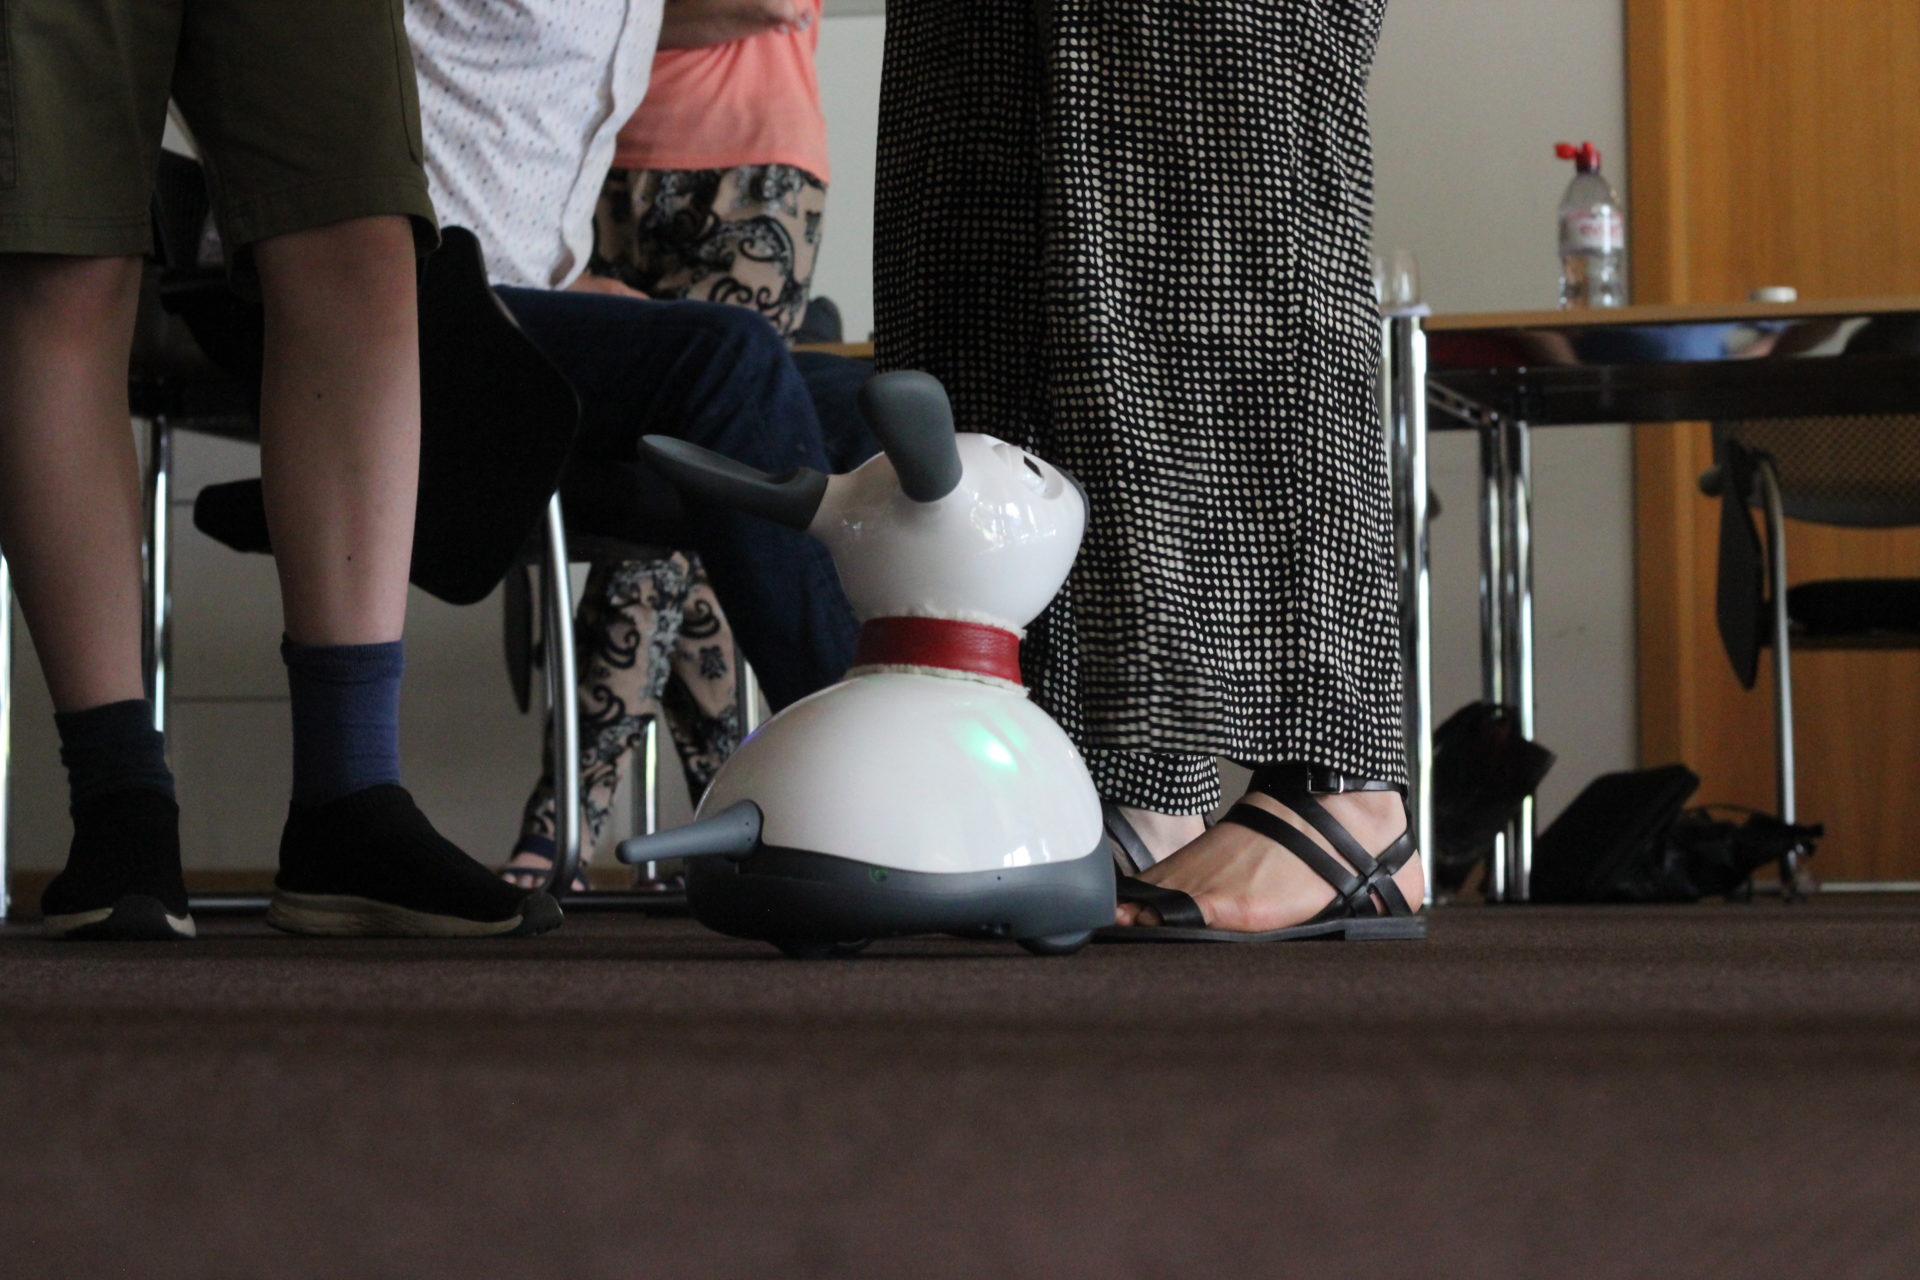 A MiRo robot sits on the floor, gazing up at a workshop participant.